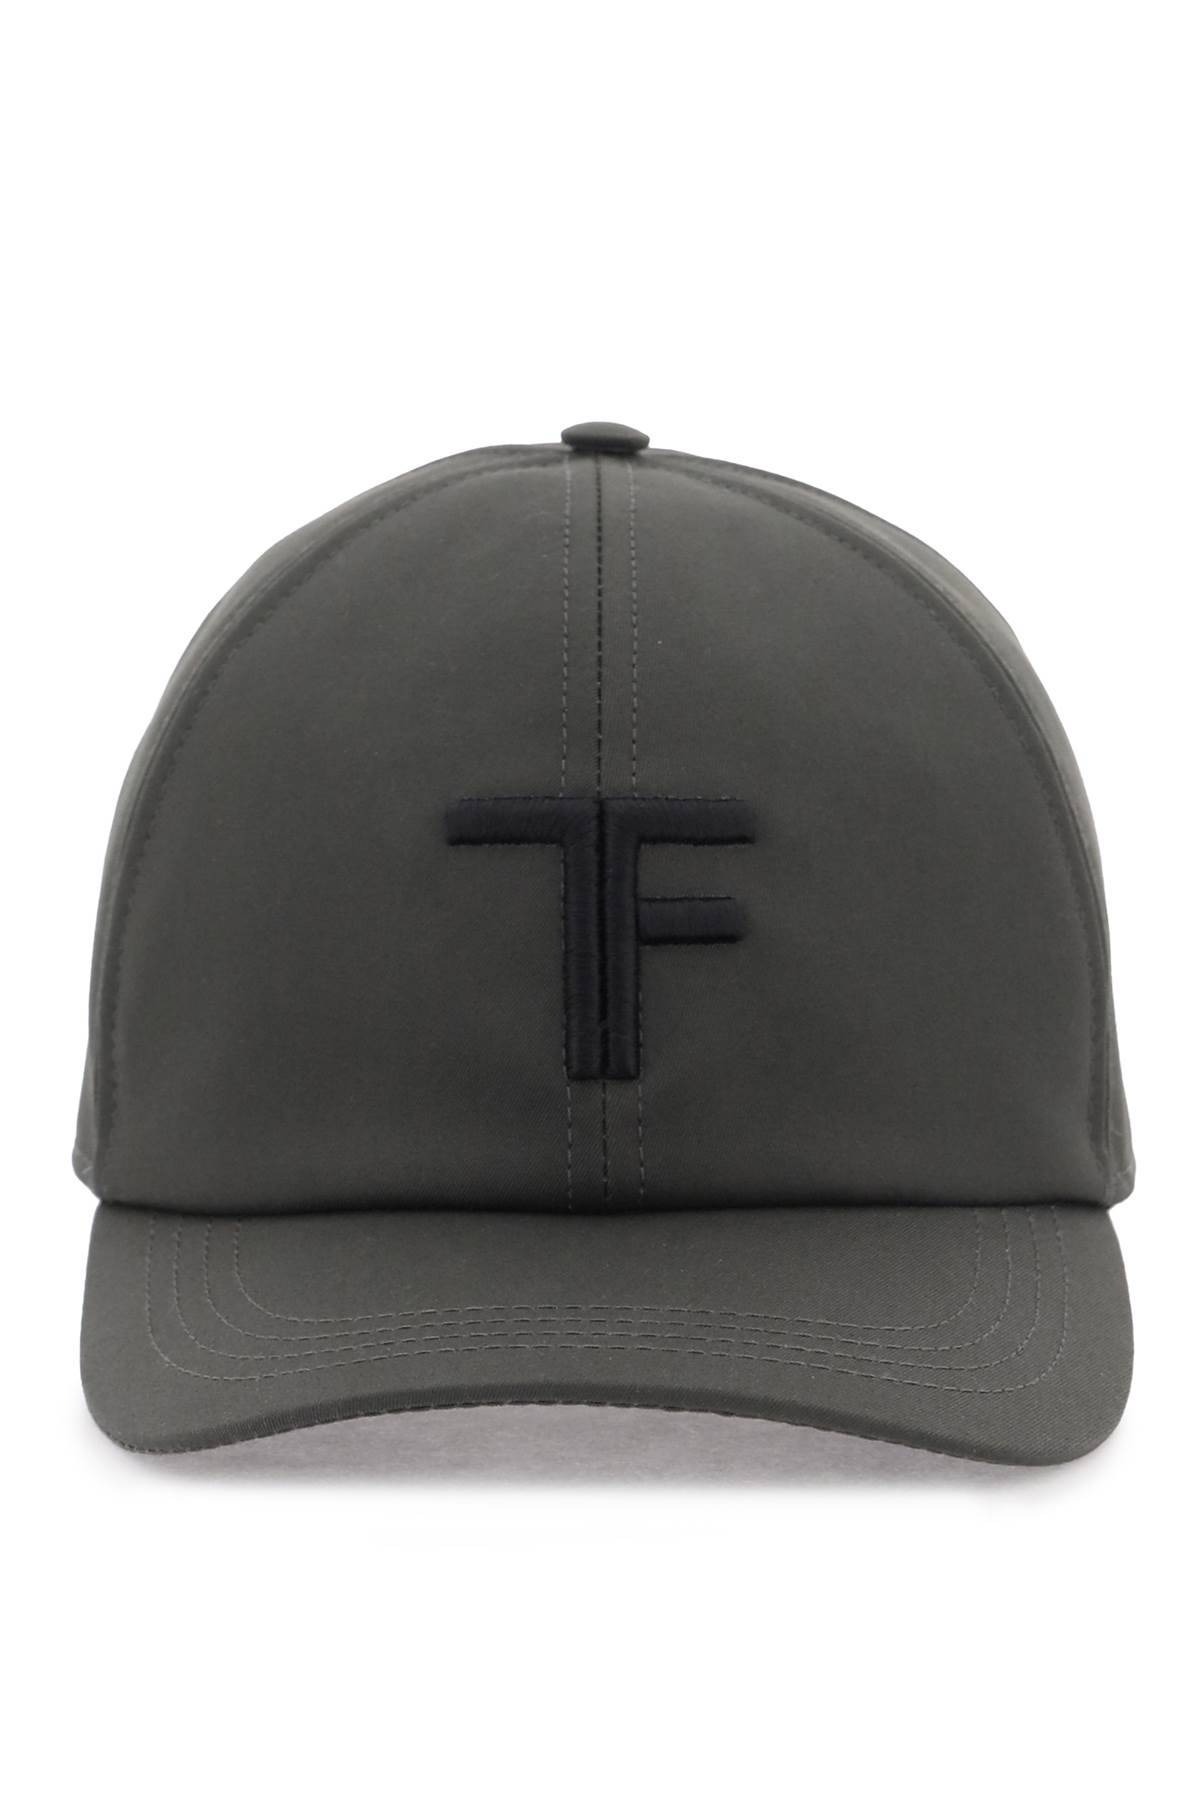 Tom Ford TOM FORD baseball cap with embroidery